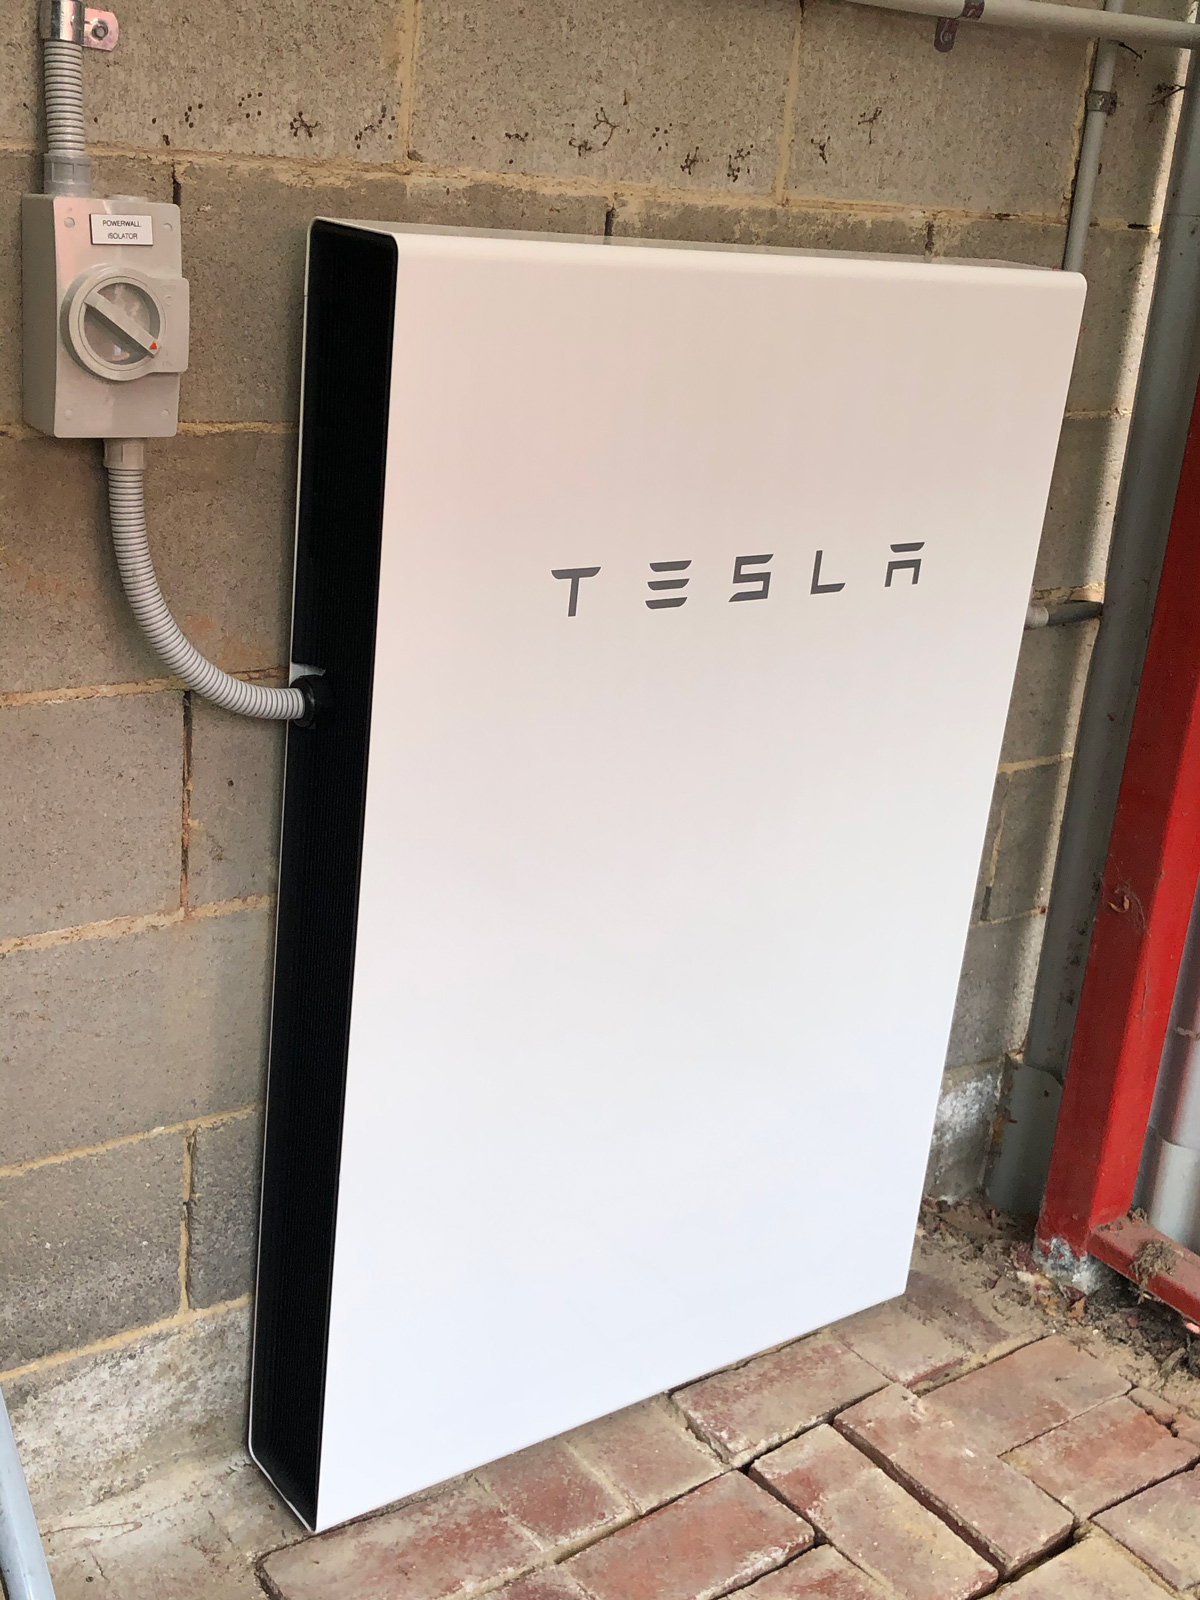 Tesla PowerWall 2 in place in our shed